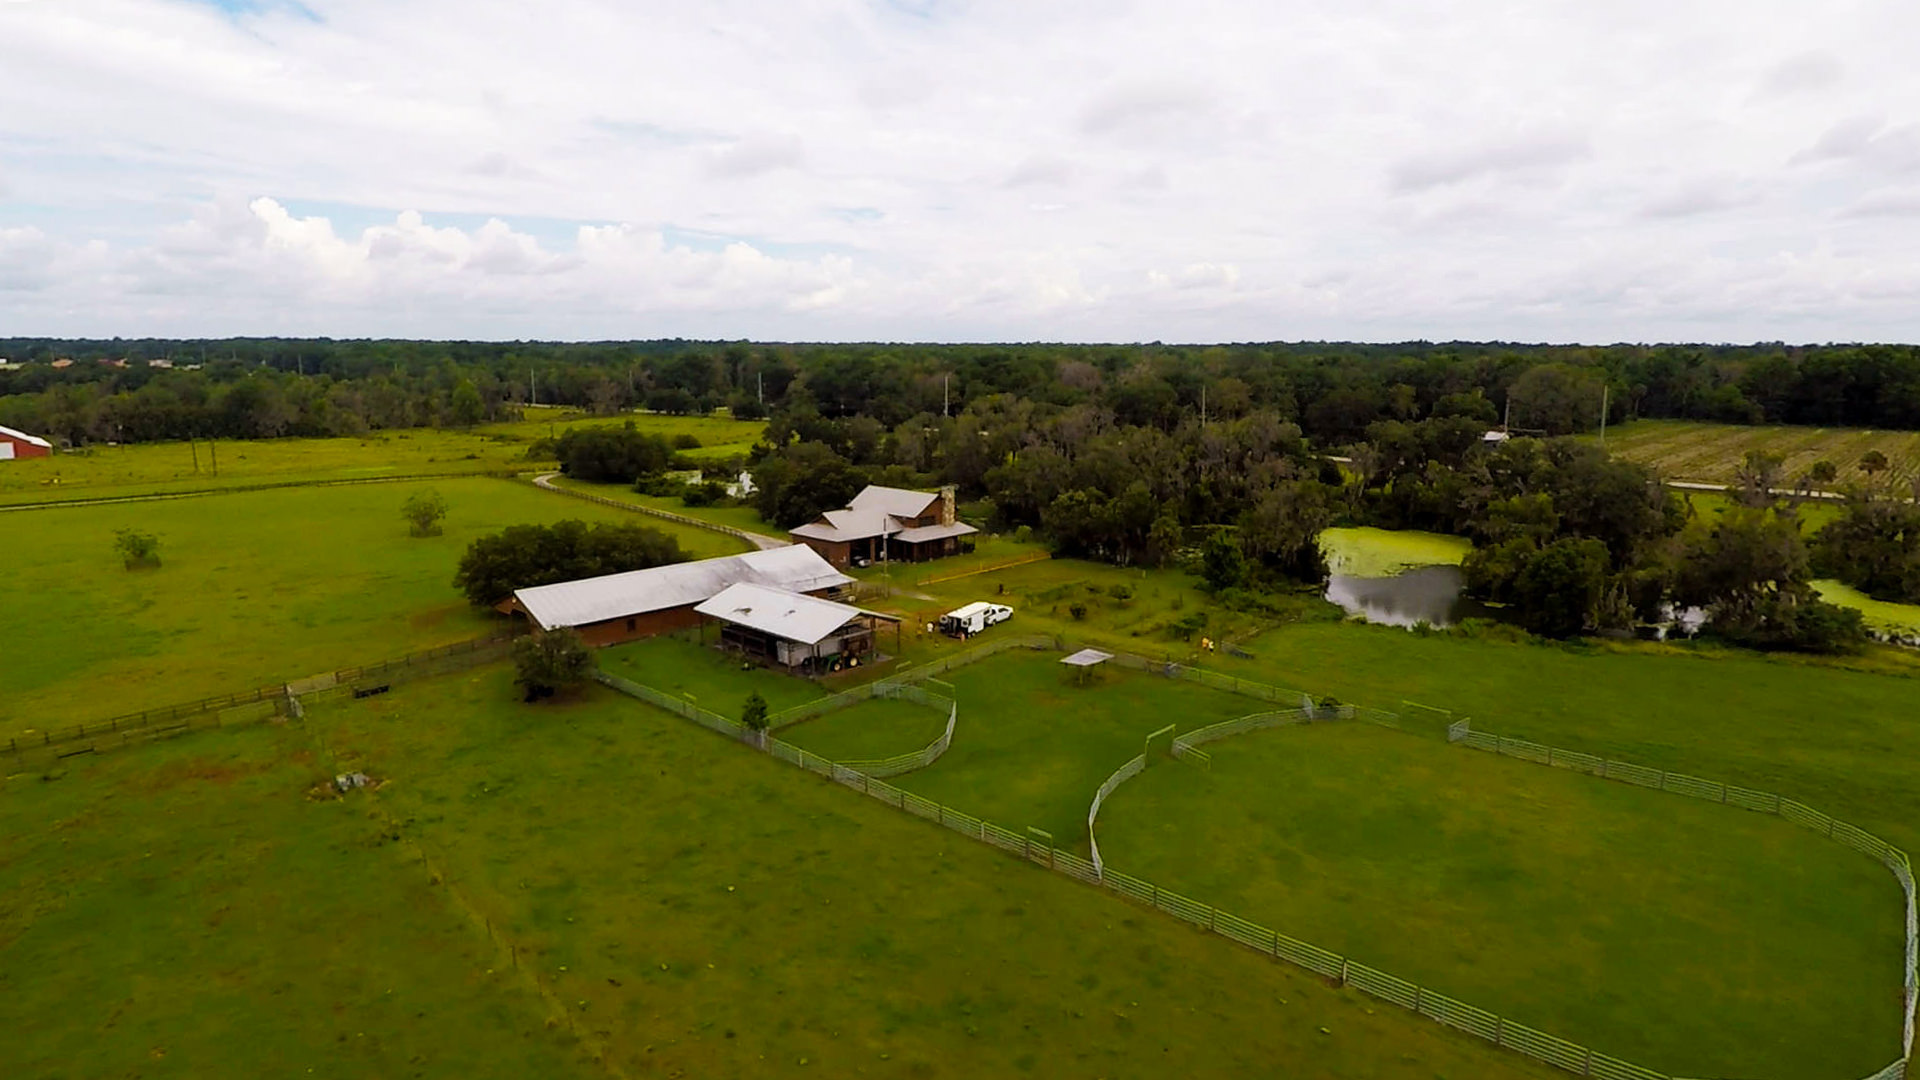 Fire River 4 Ranch | Horse Boarding in Plant City